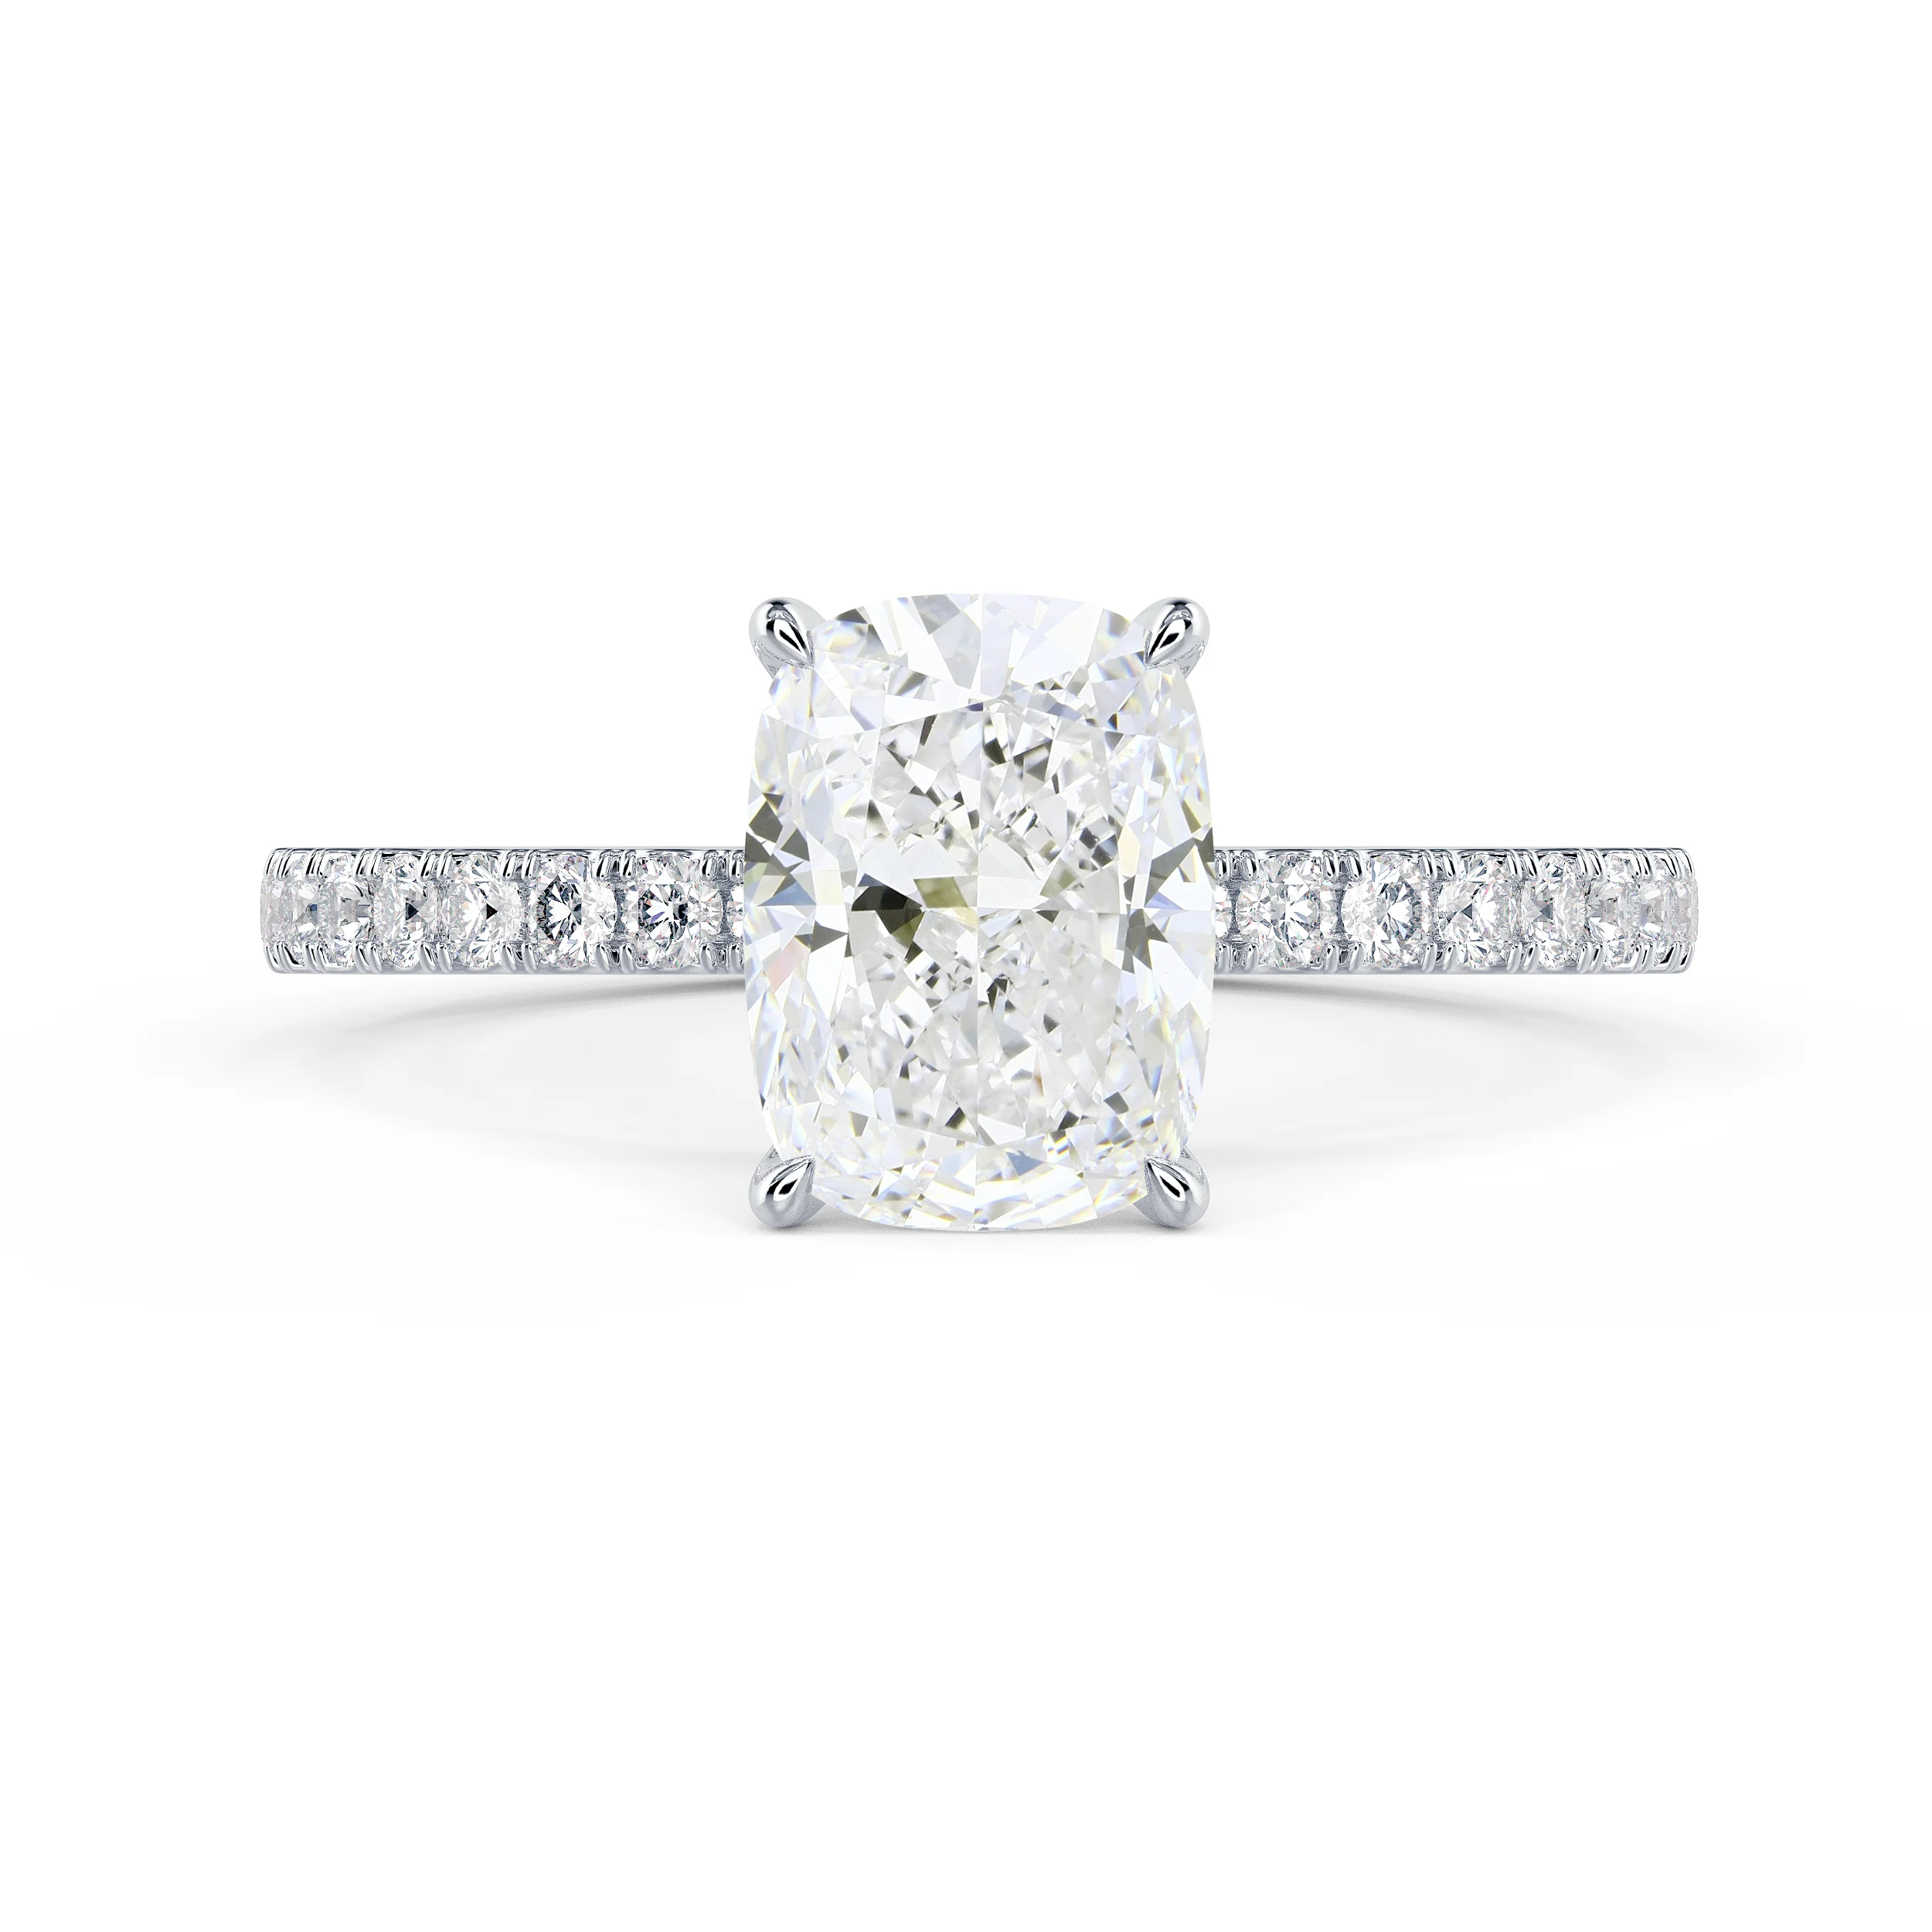 Diamonds set in White Gold Cushion Classic Four Prong Pavé Diamond Engagement Ring (Main View)